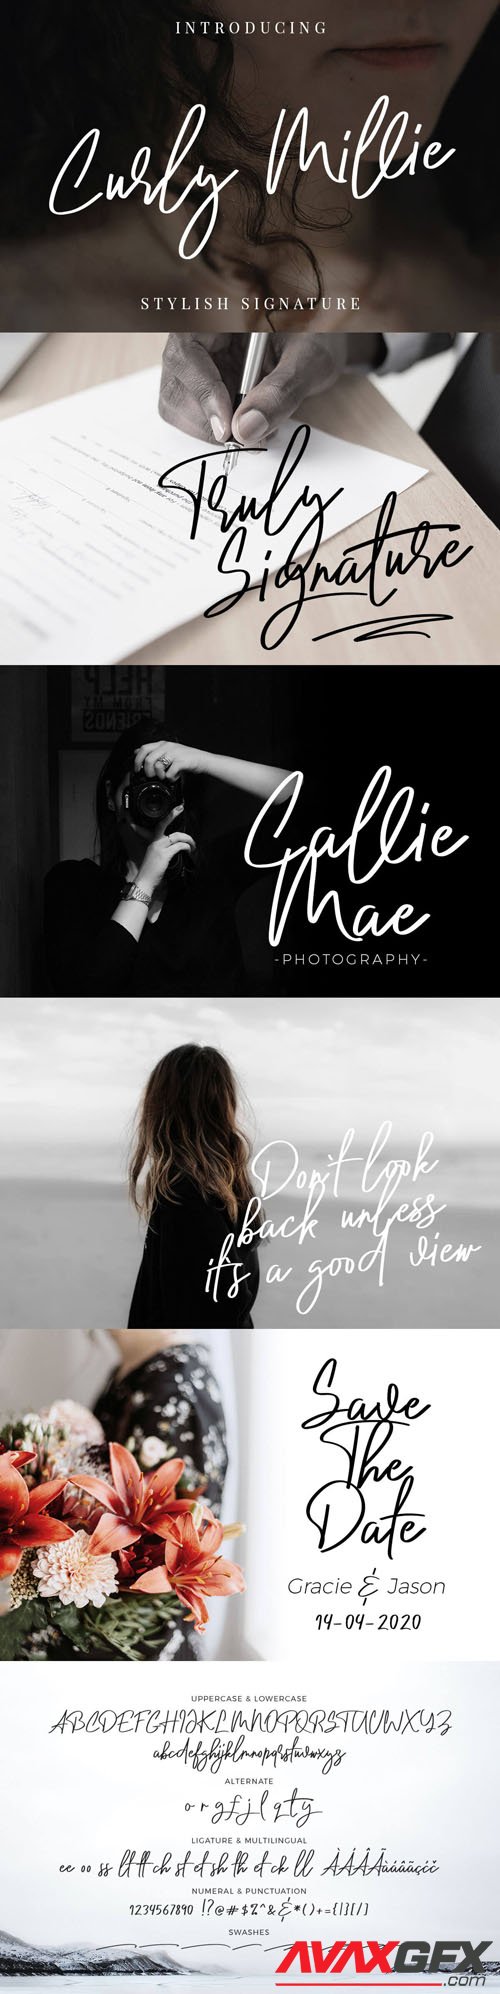 Curly Millie - Stylish Signiture Font